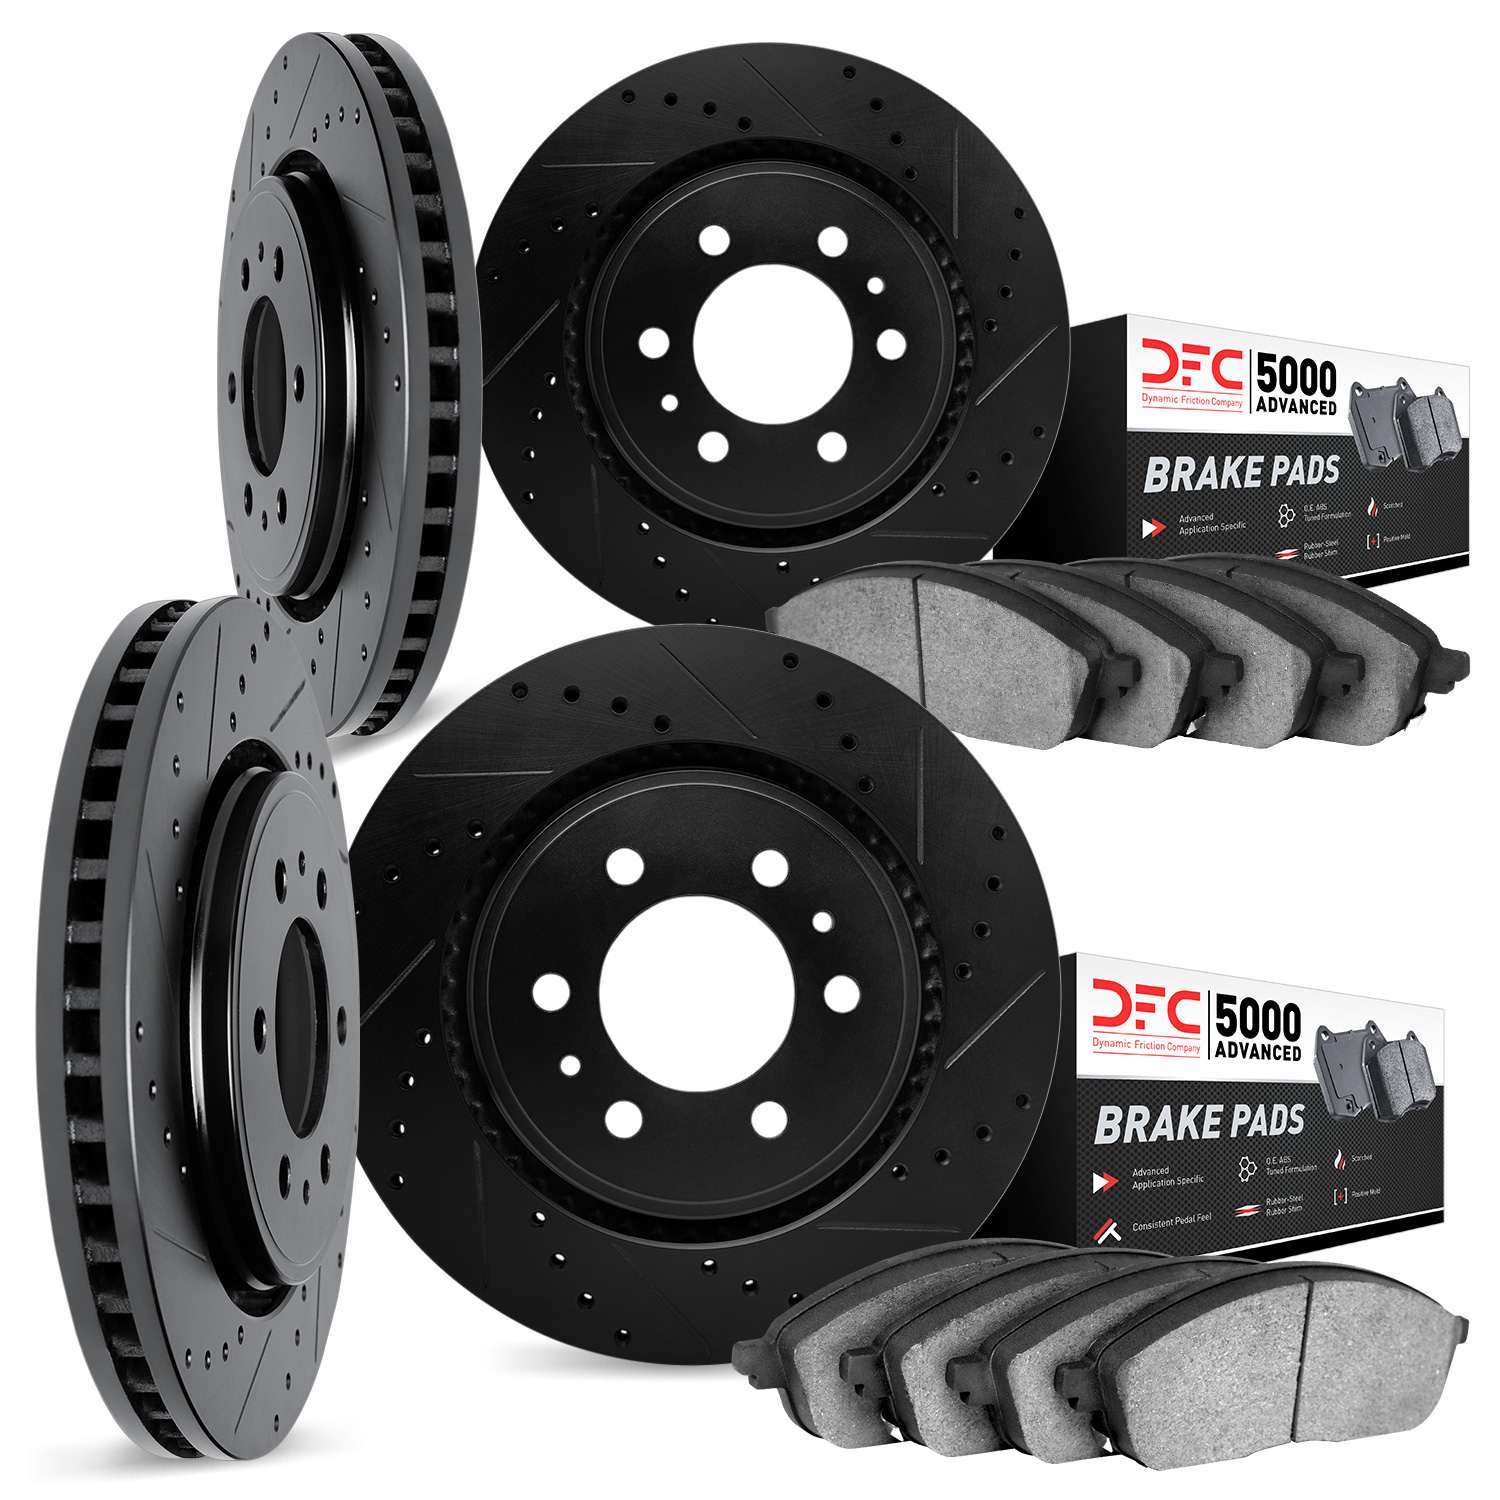 8504-48046 Drilled/Slotted Brake Rotors w/5000 Advanced Brake Pads Kit [Black], 2007-2017 GM, Position: Front and Rear